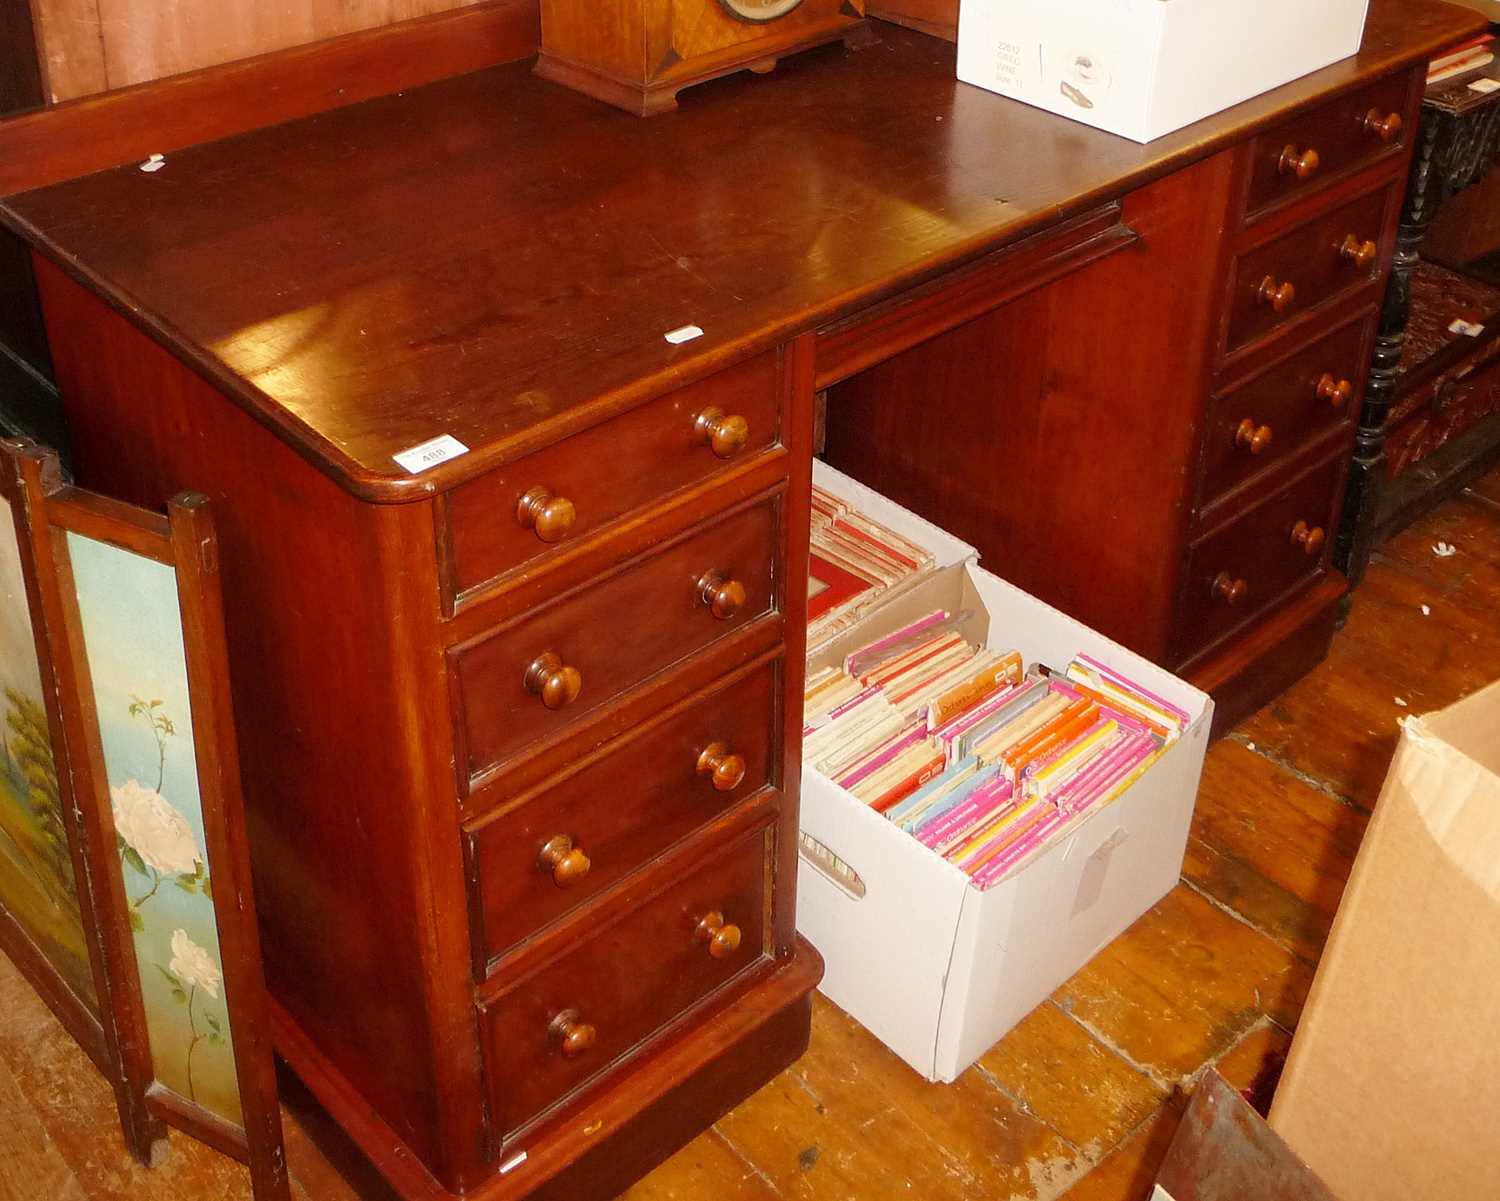 Mahogany kneehole desk with 9 drawers